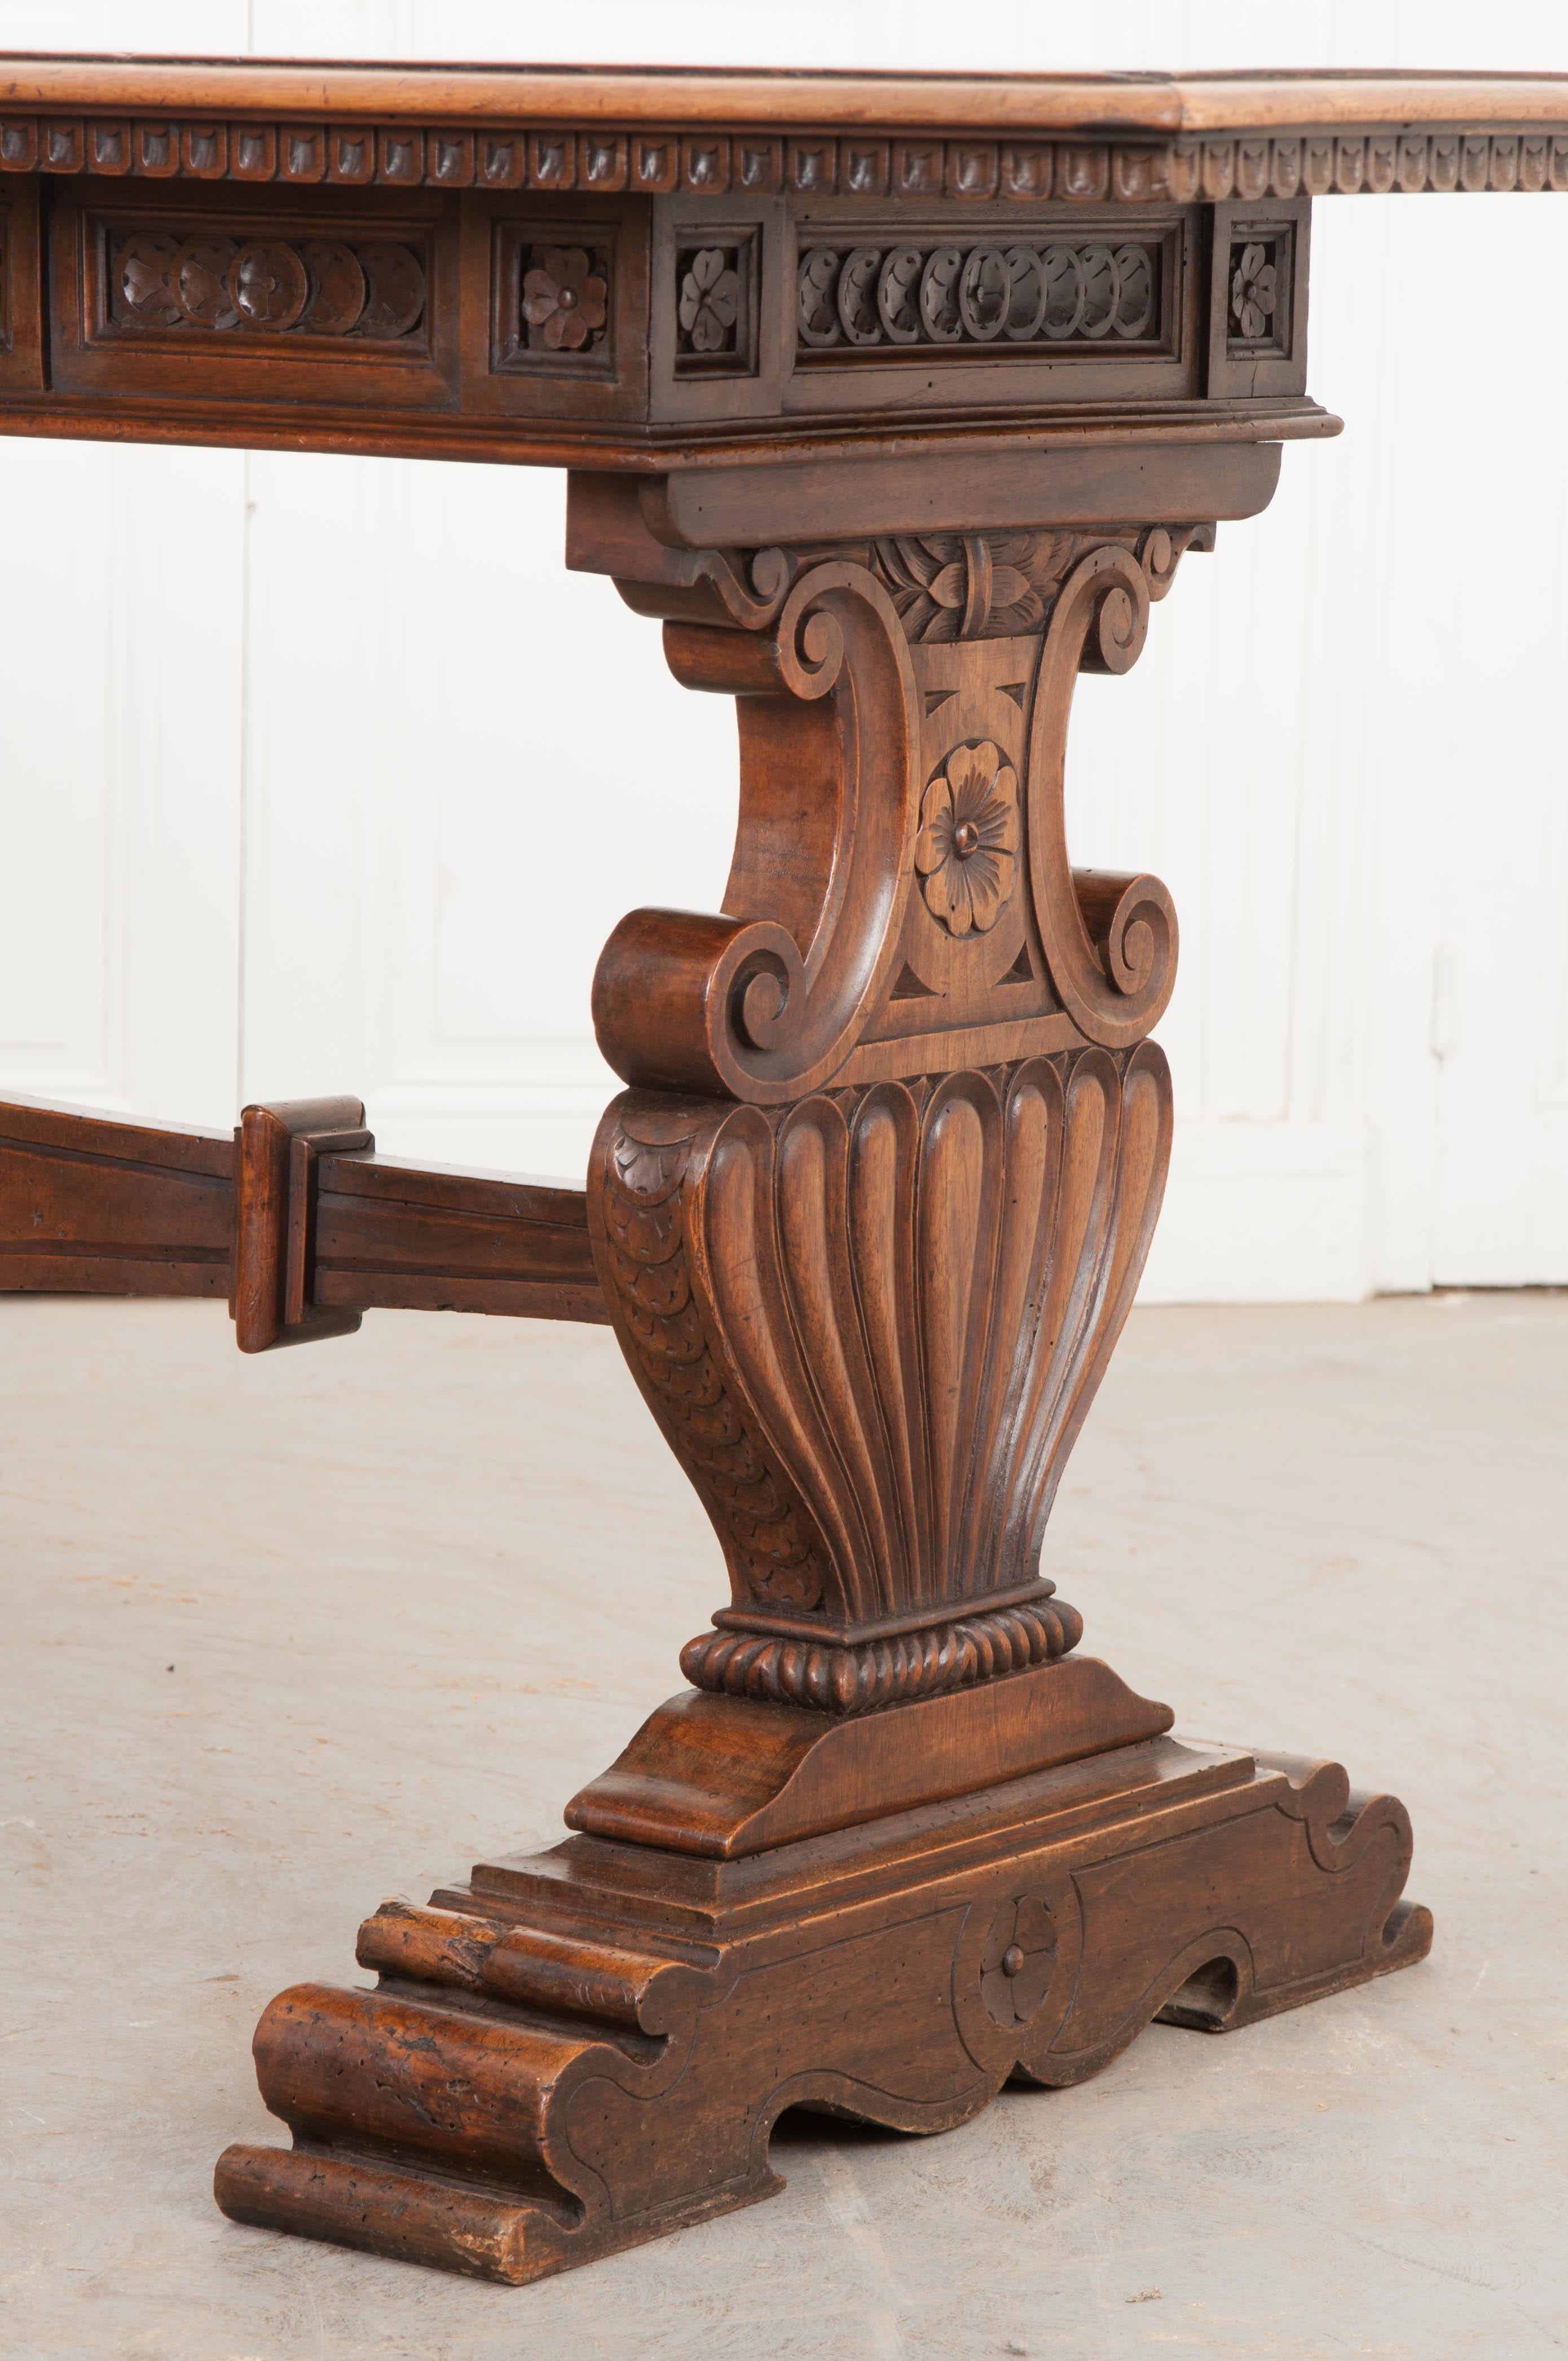 This highly-carved Regency Classicism library table was created in 1830s England and features an elongated rectangular surface with a stepped and dentillated lower edge, atop an apron carved in an “encircled flower head” motif and outfitted with a